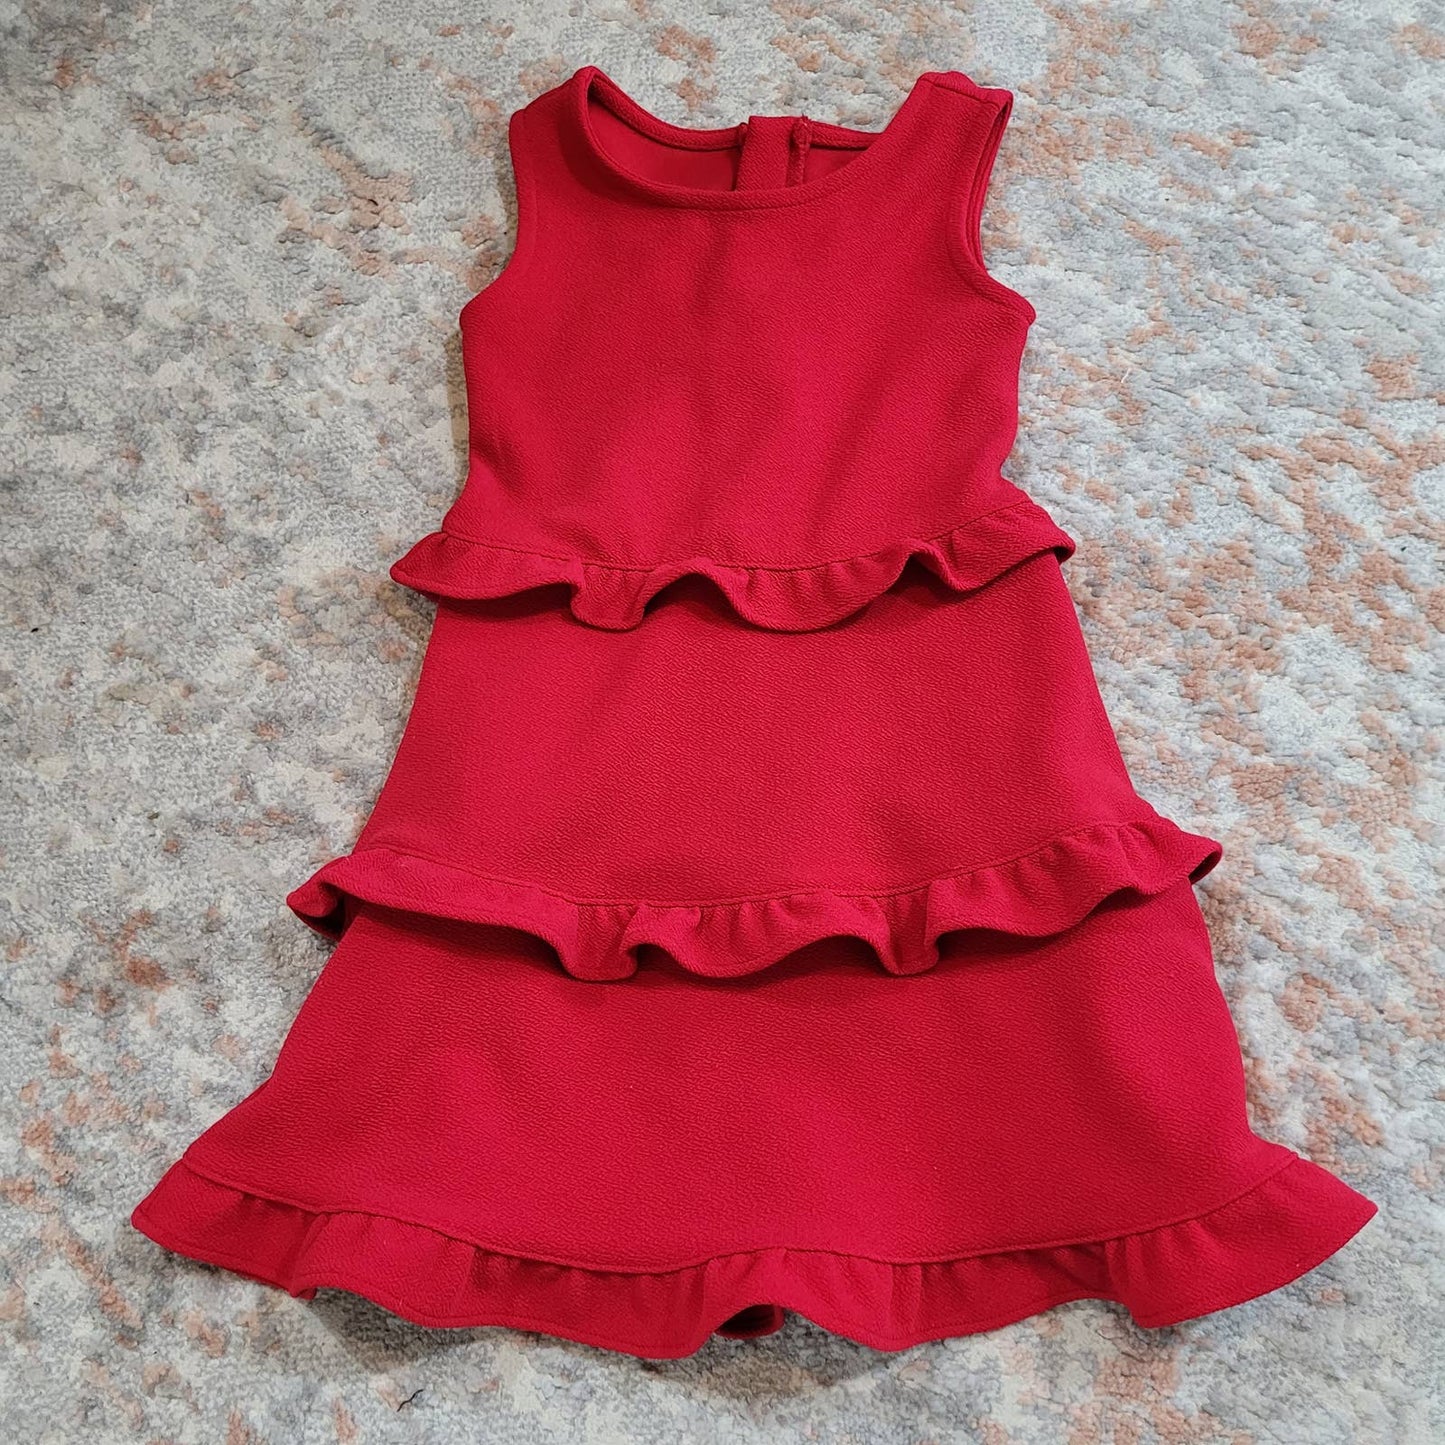 Place Red Ruffled Dress - Size 4